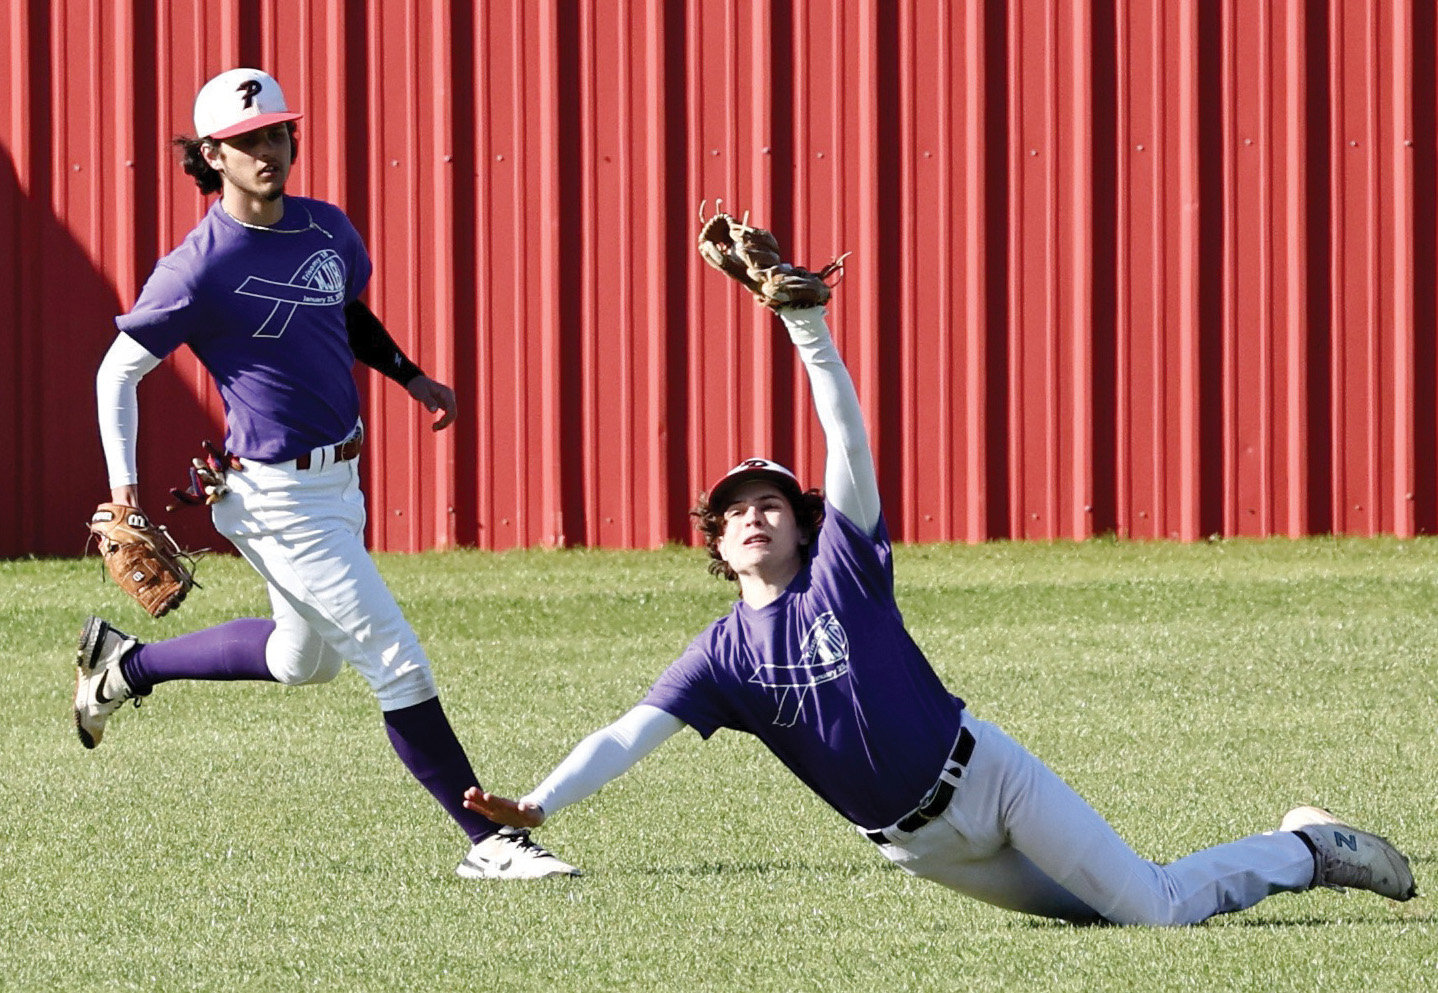 Purcell junior Jett Tyler lays out for a ball in center field during Purcell’s game with Newcastle. The Dragons were defeated 10-6.